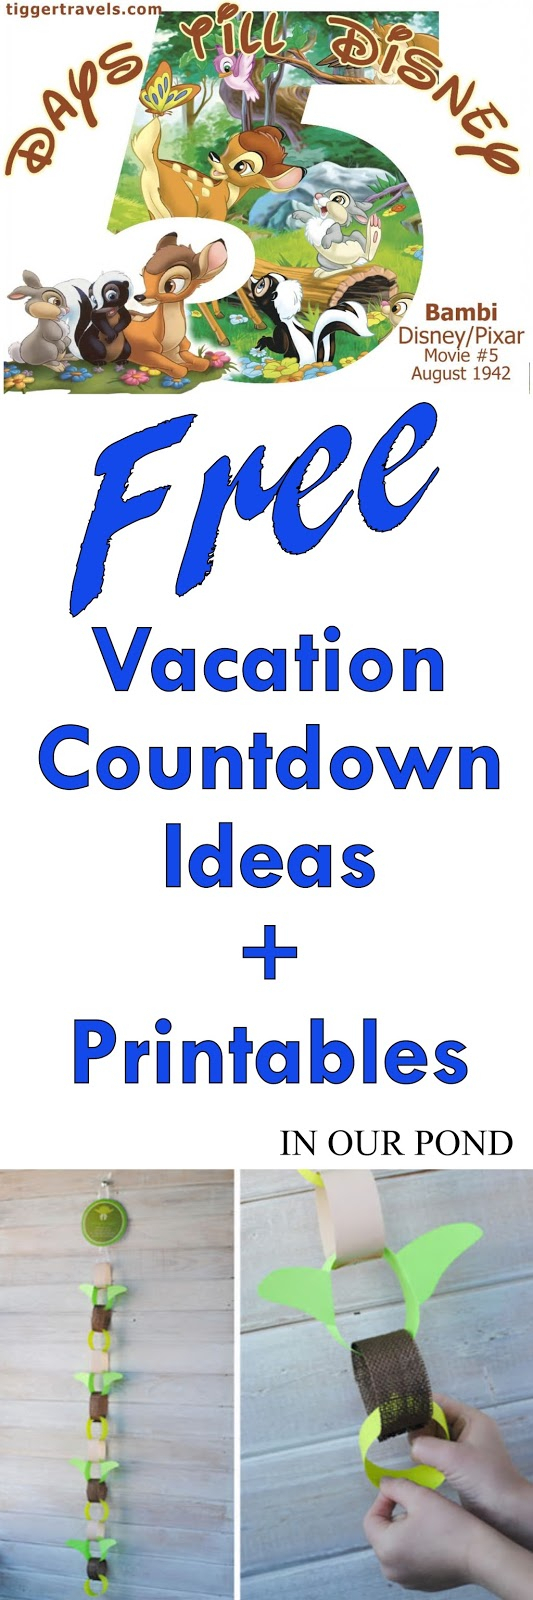 Countdowns For Vacation With Free Printables In Our Pond